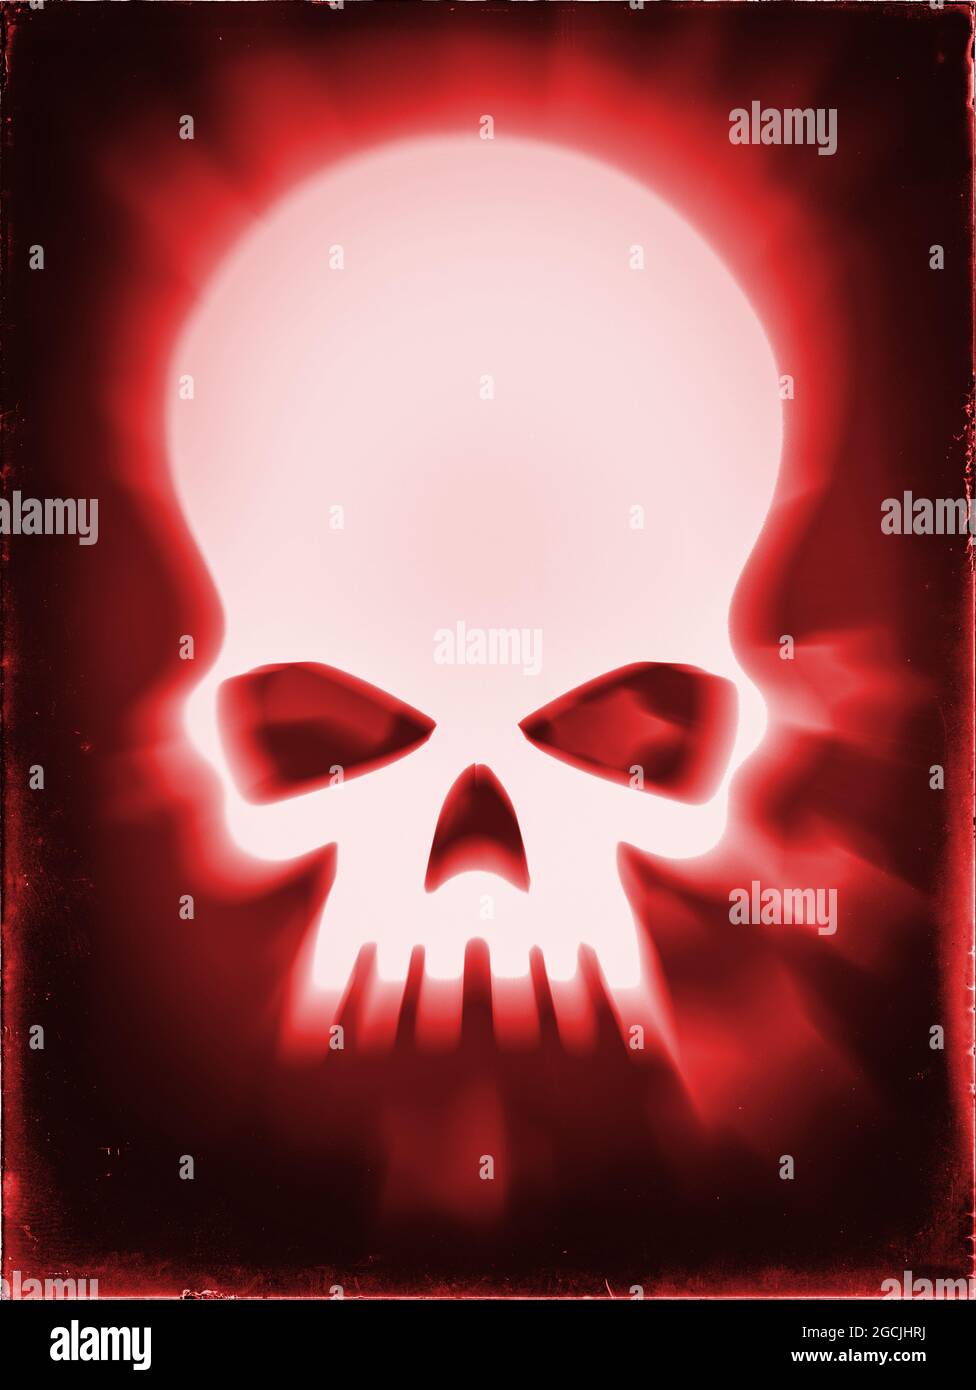 White distorted Pirate skull on a red vintage background Stock Photo